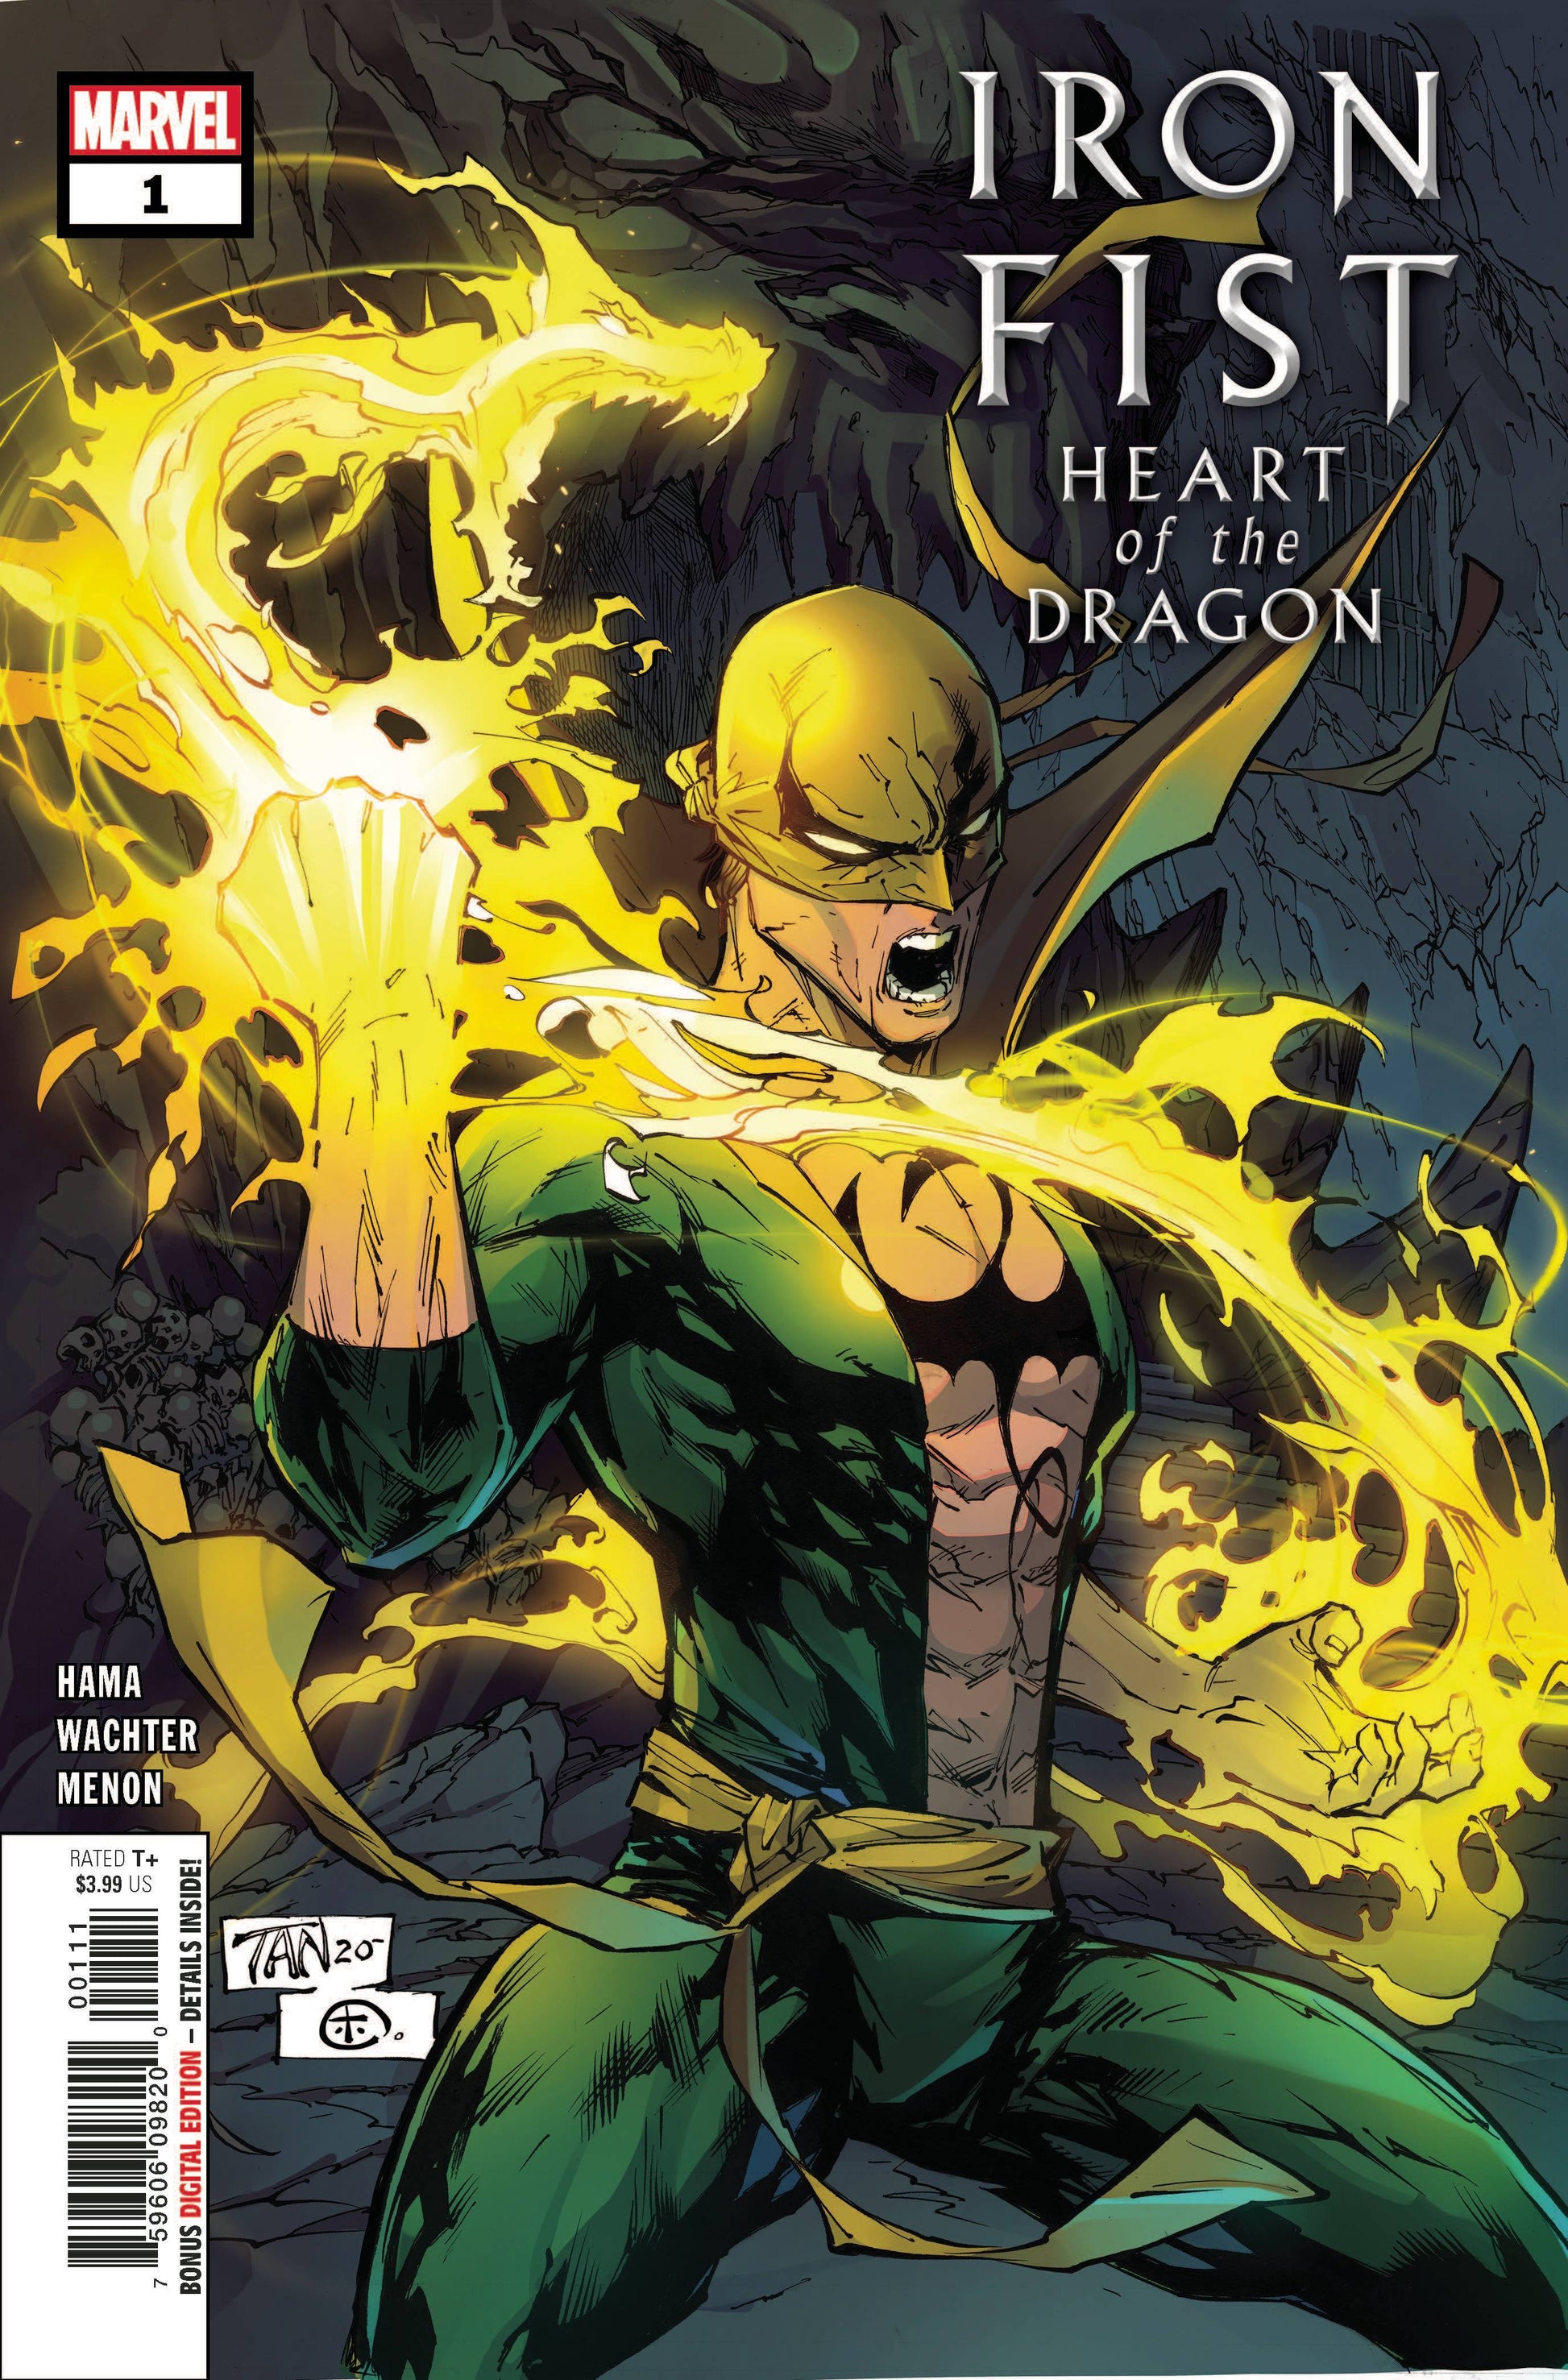 Iron Fist Heart of Dragon 1 - Heroes Cave